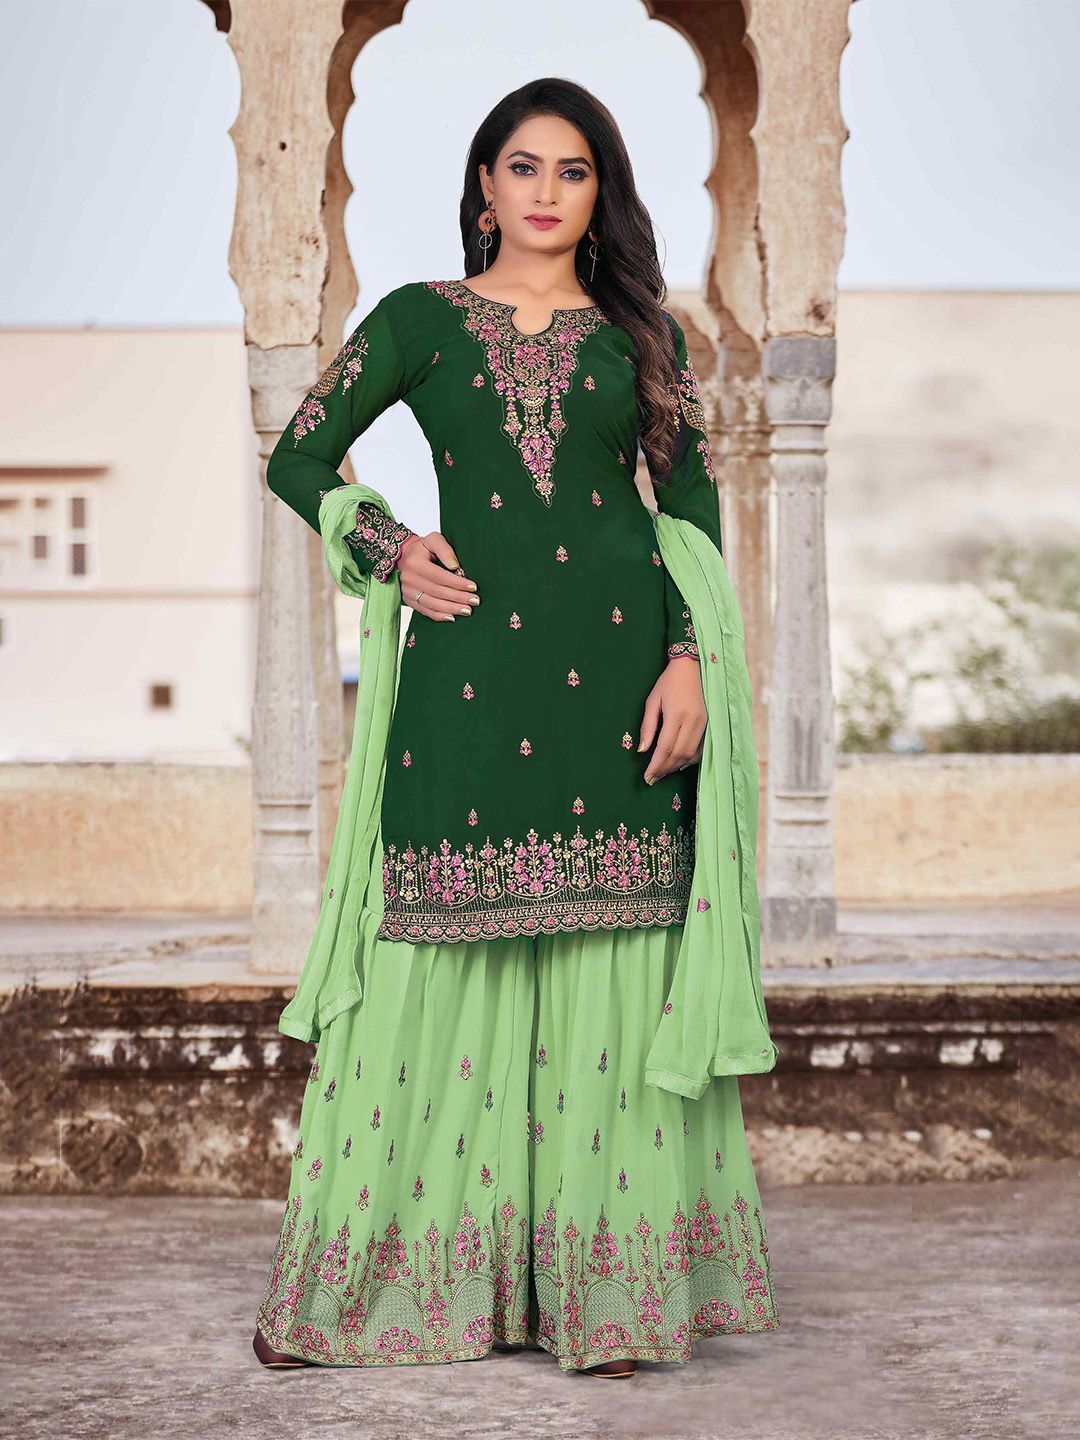 Divine International Trading Co Green & Gold-Toned Embroidered Unstitched Dress Material Price in India